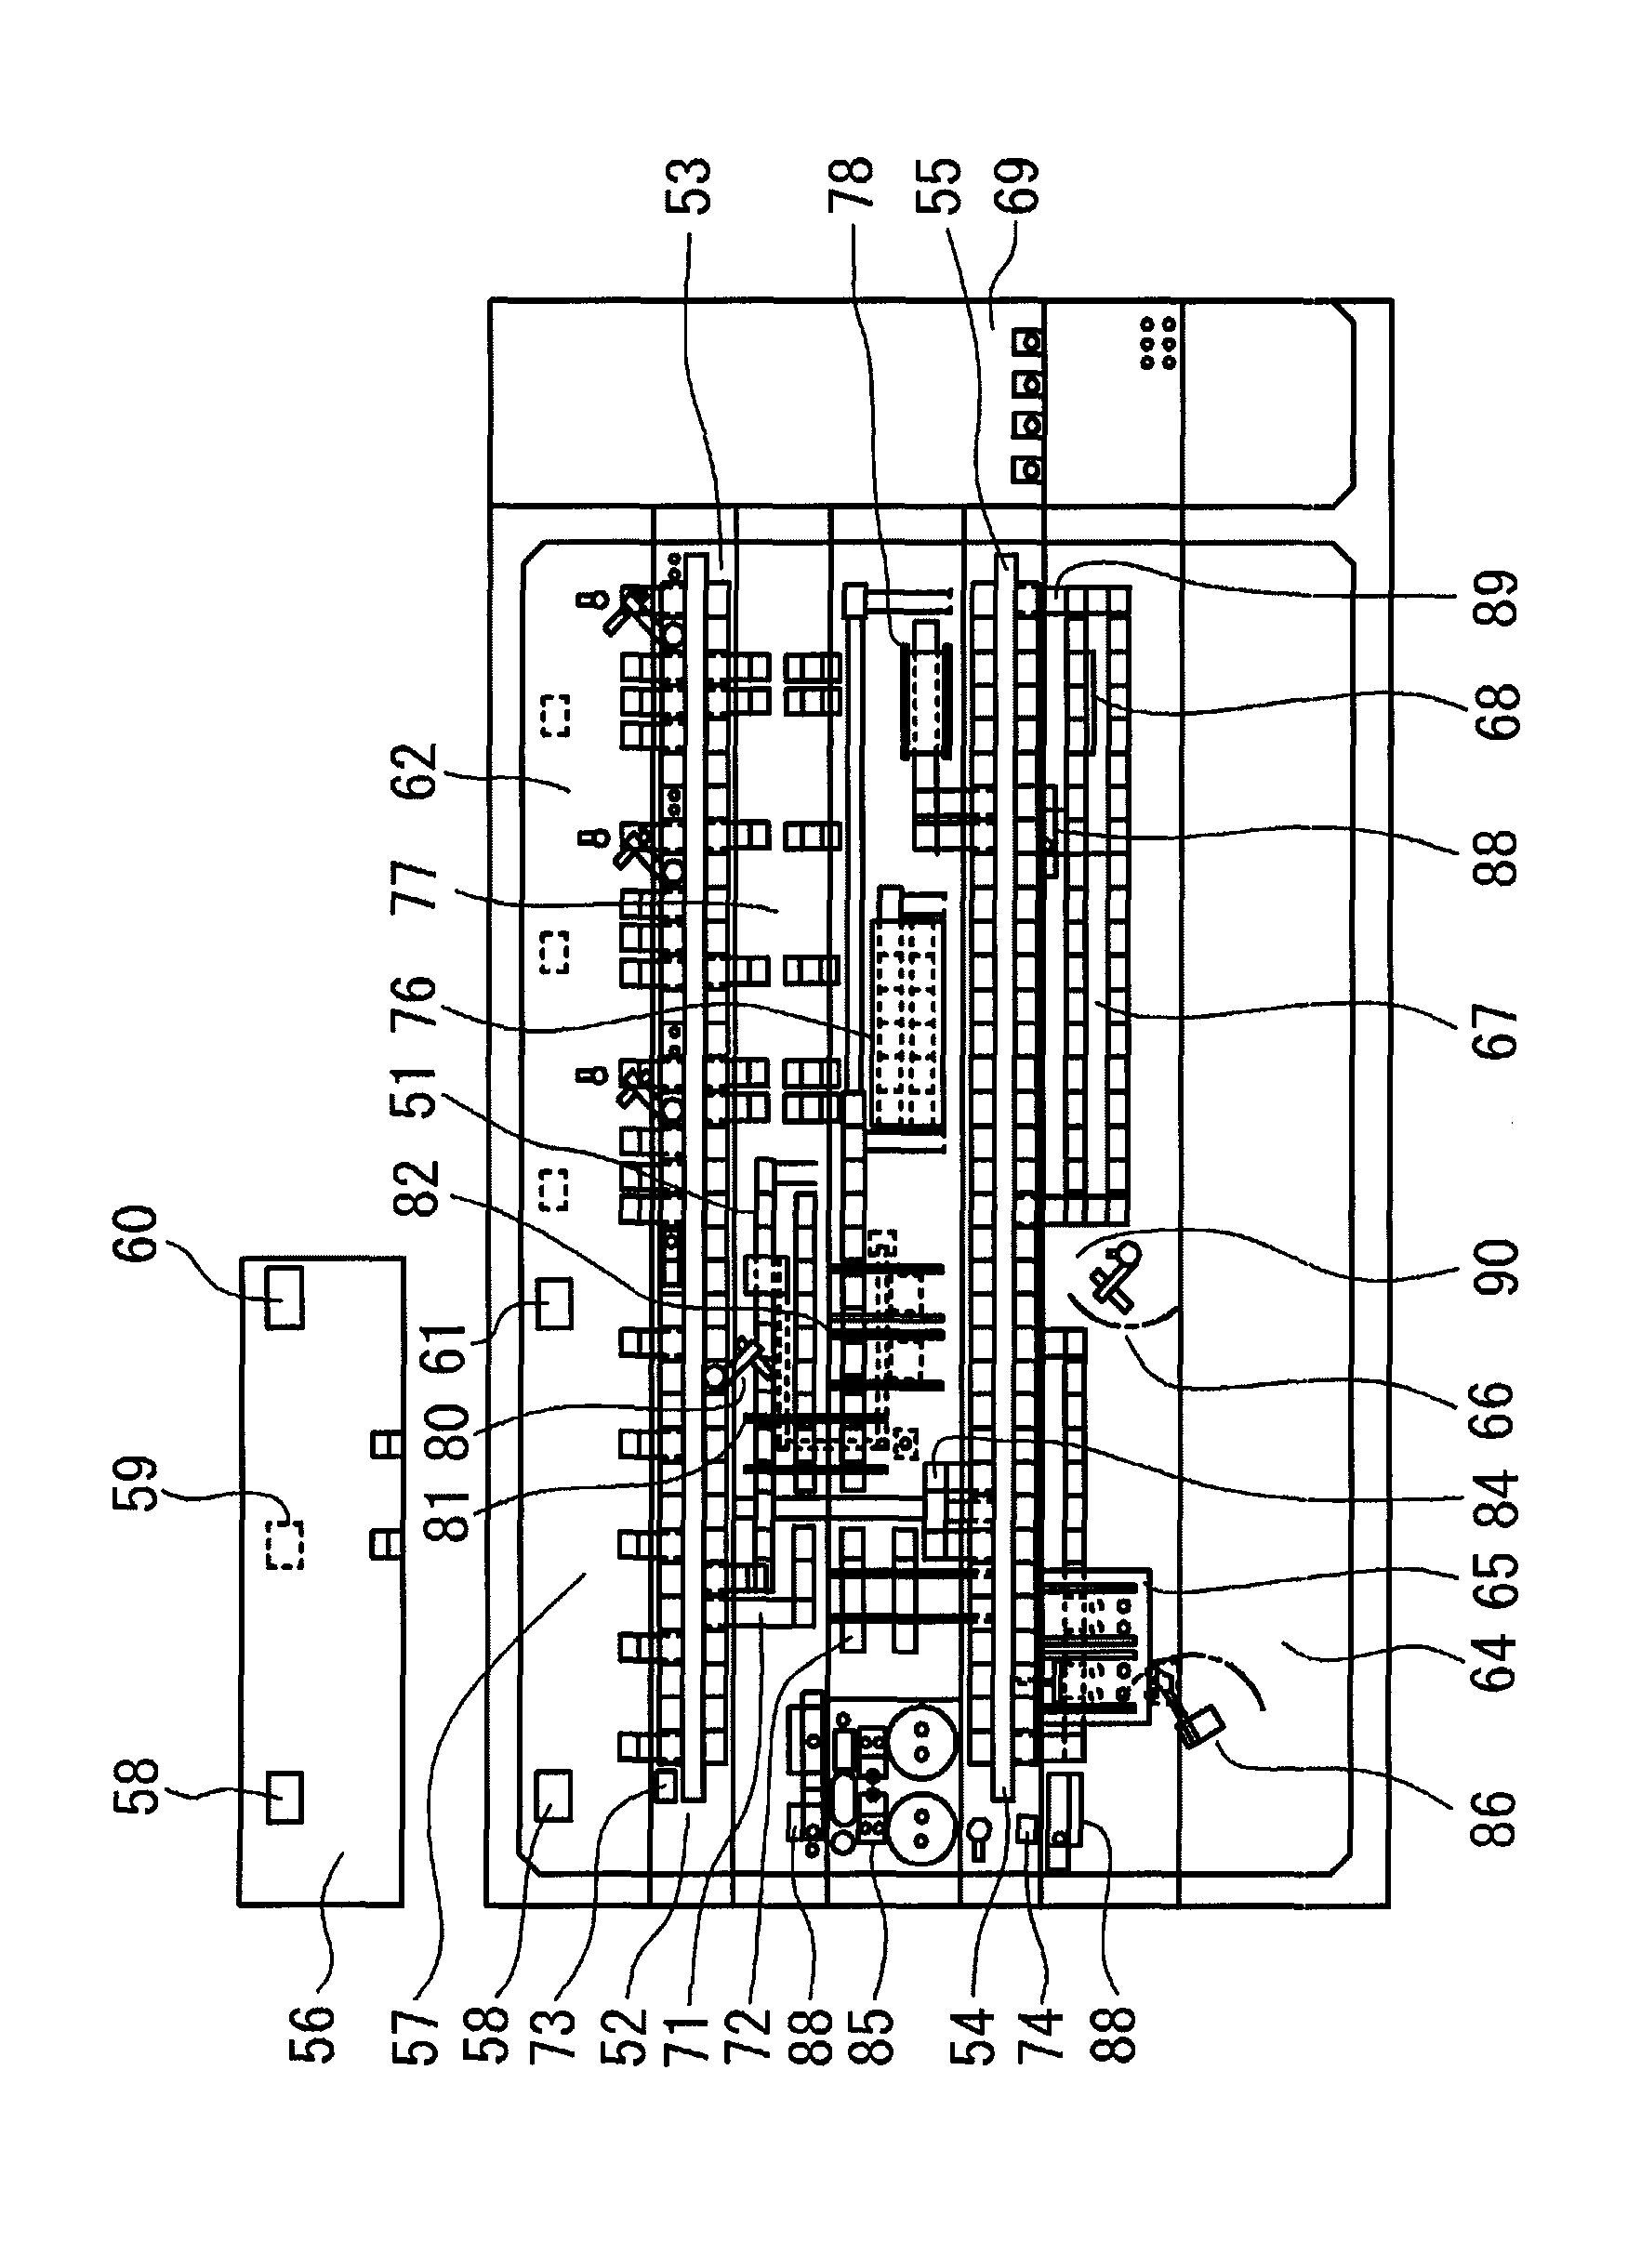 Method of manufacturing cast metal products, and manufacturing plant